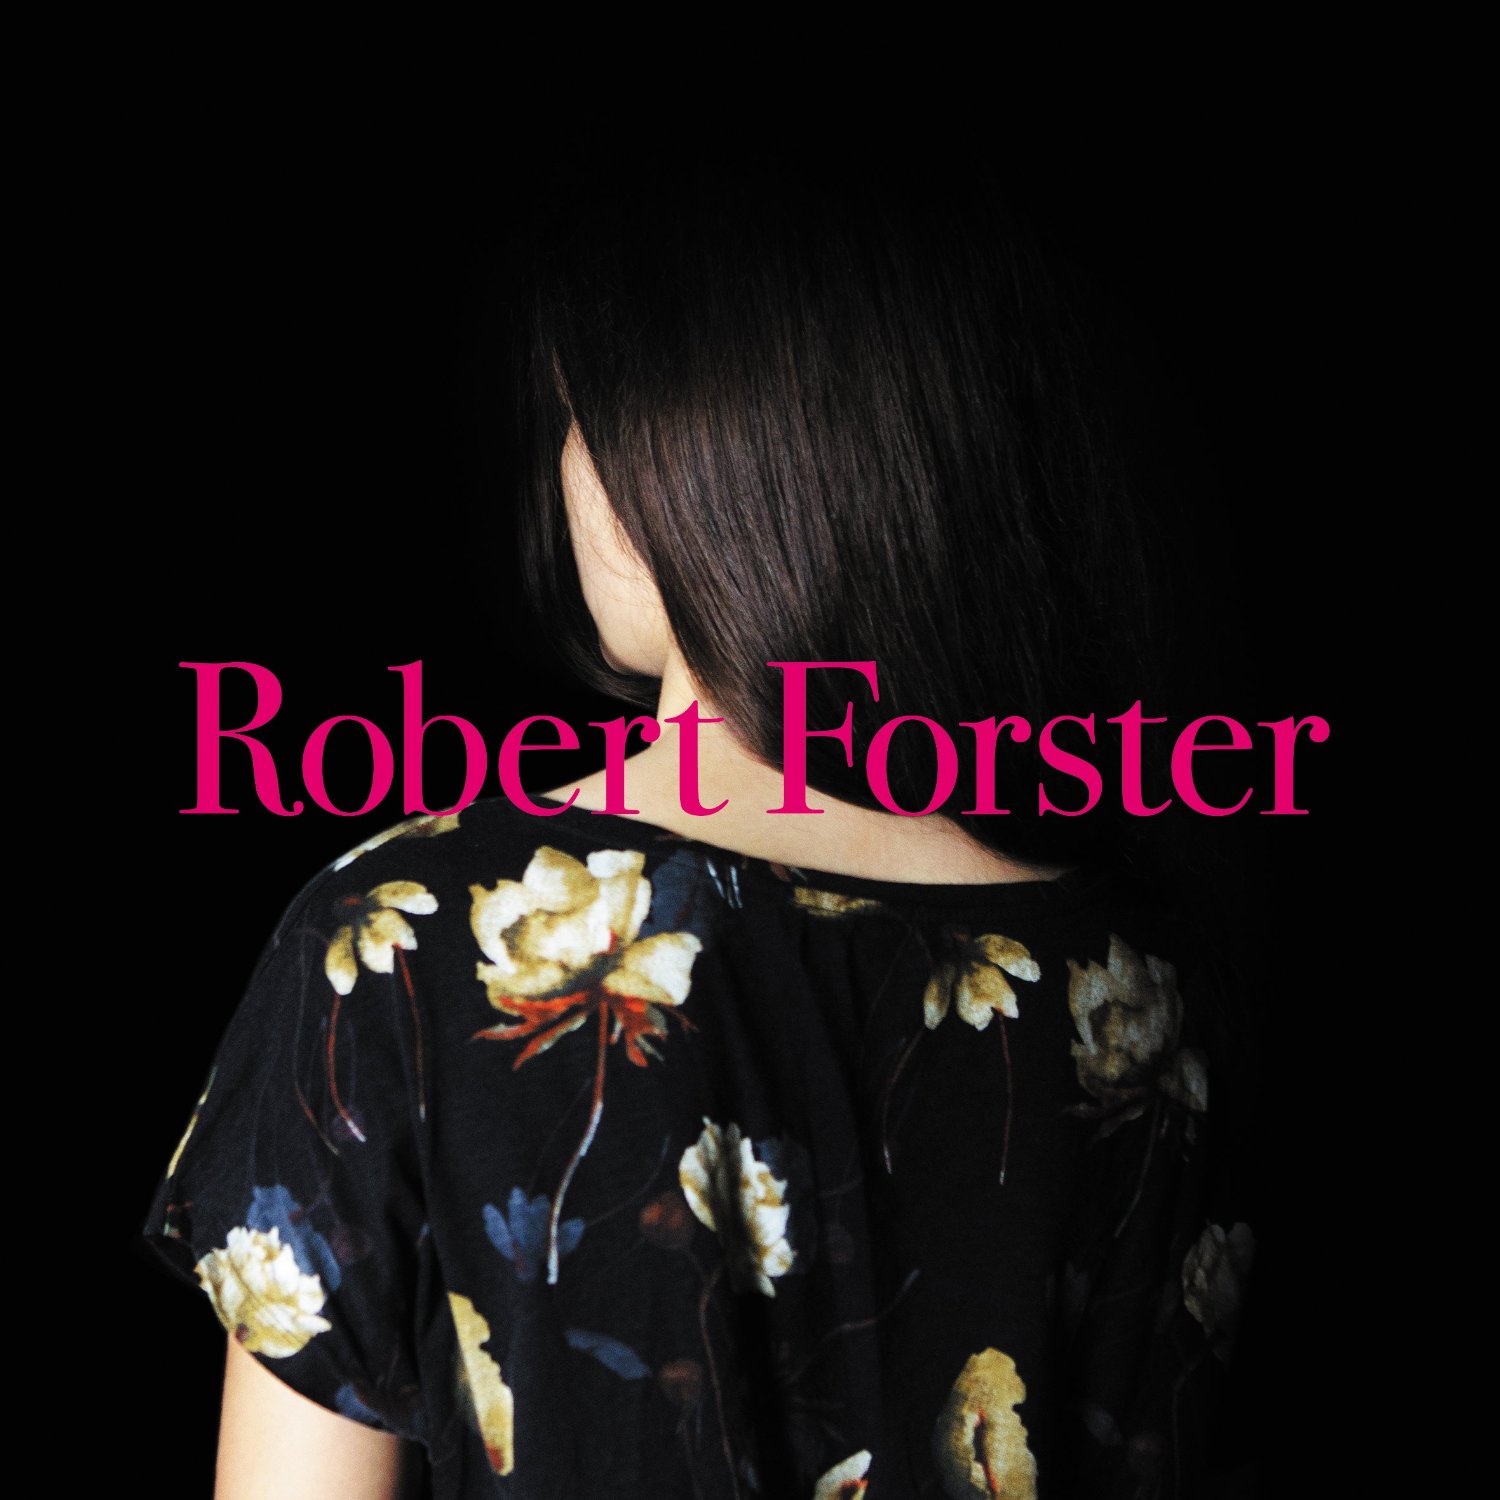 Robert Forster Songs to play